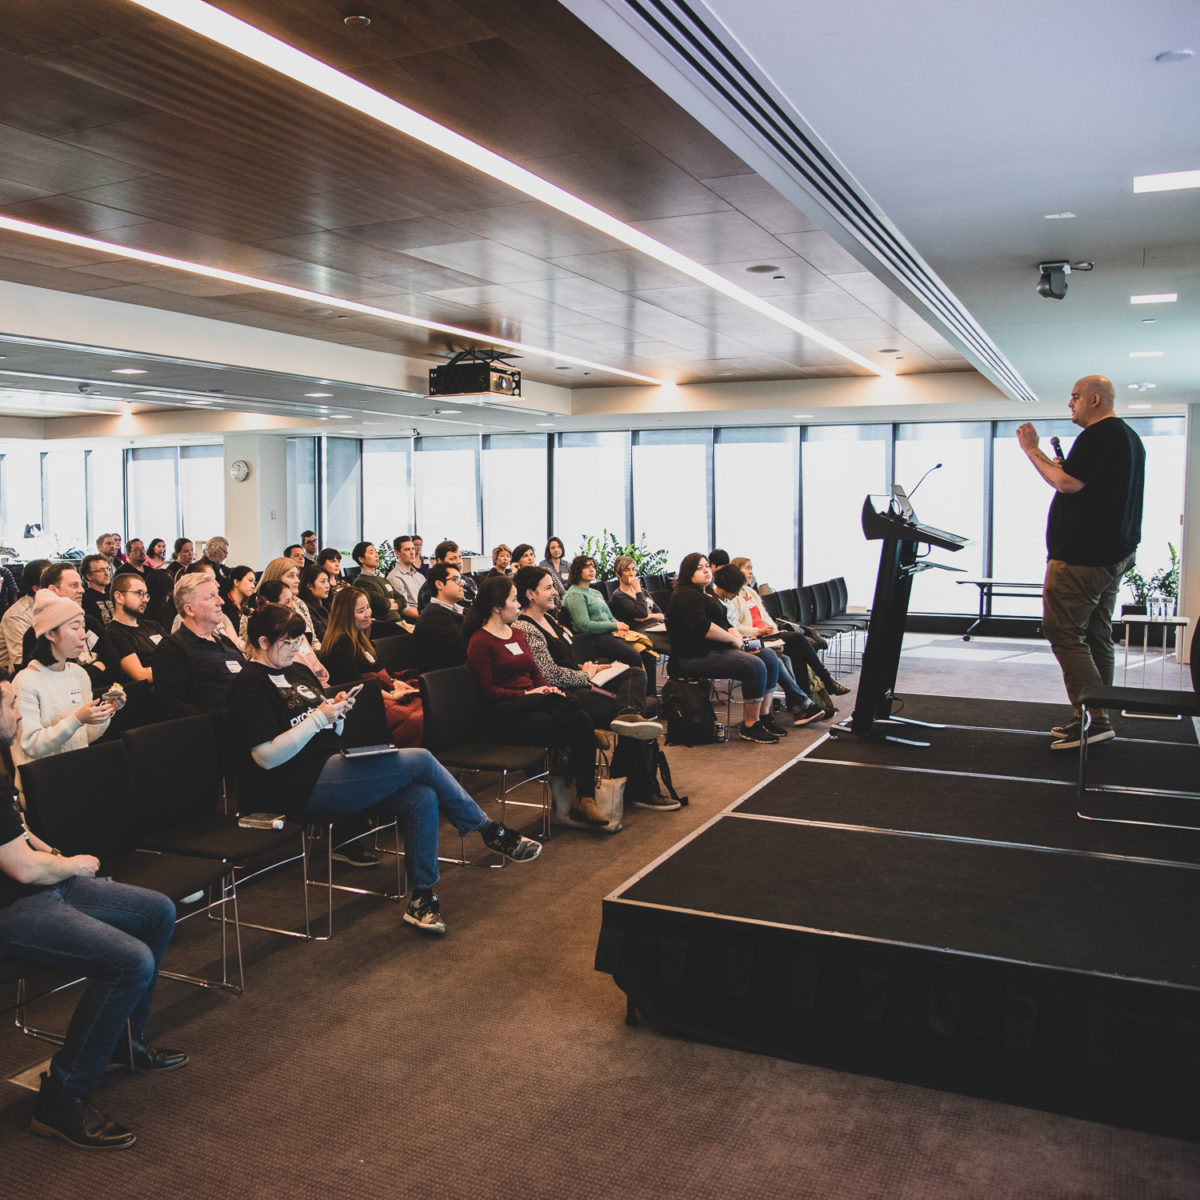 2019 Product Camp Melbourne - Crowd in main room listening to one of the speakers, Ben Jackson